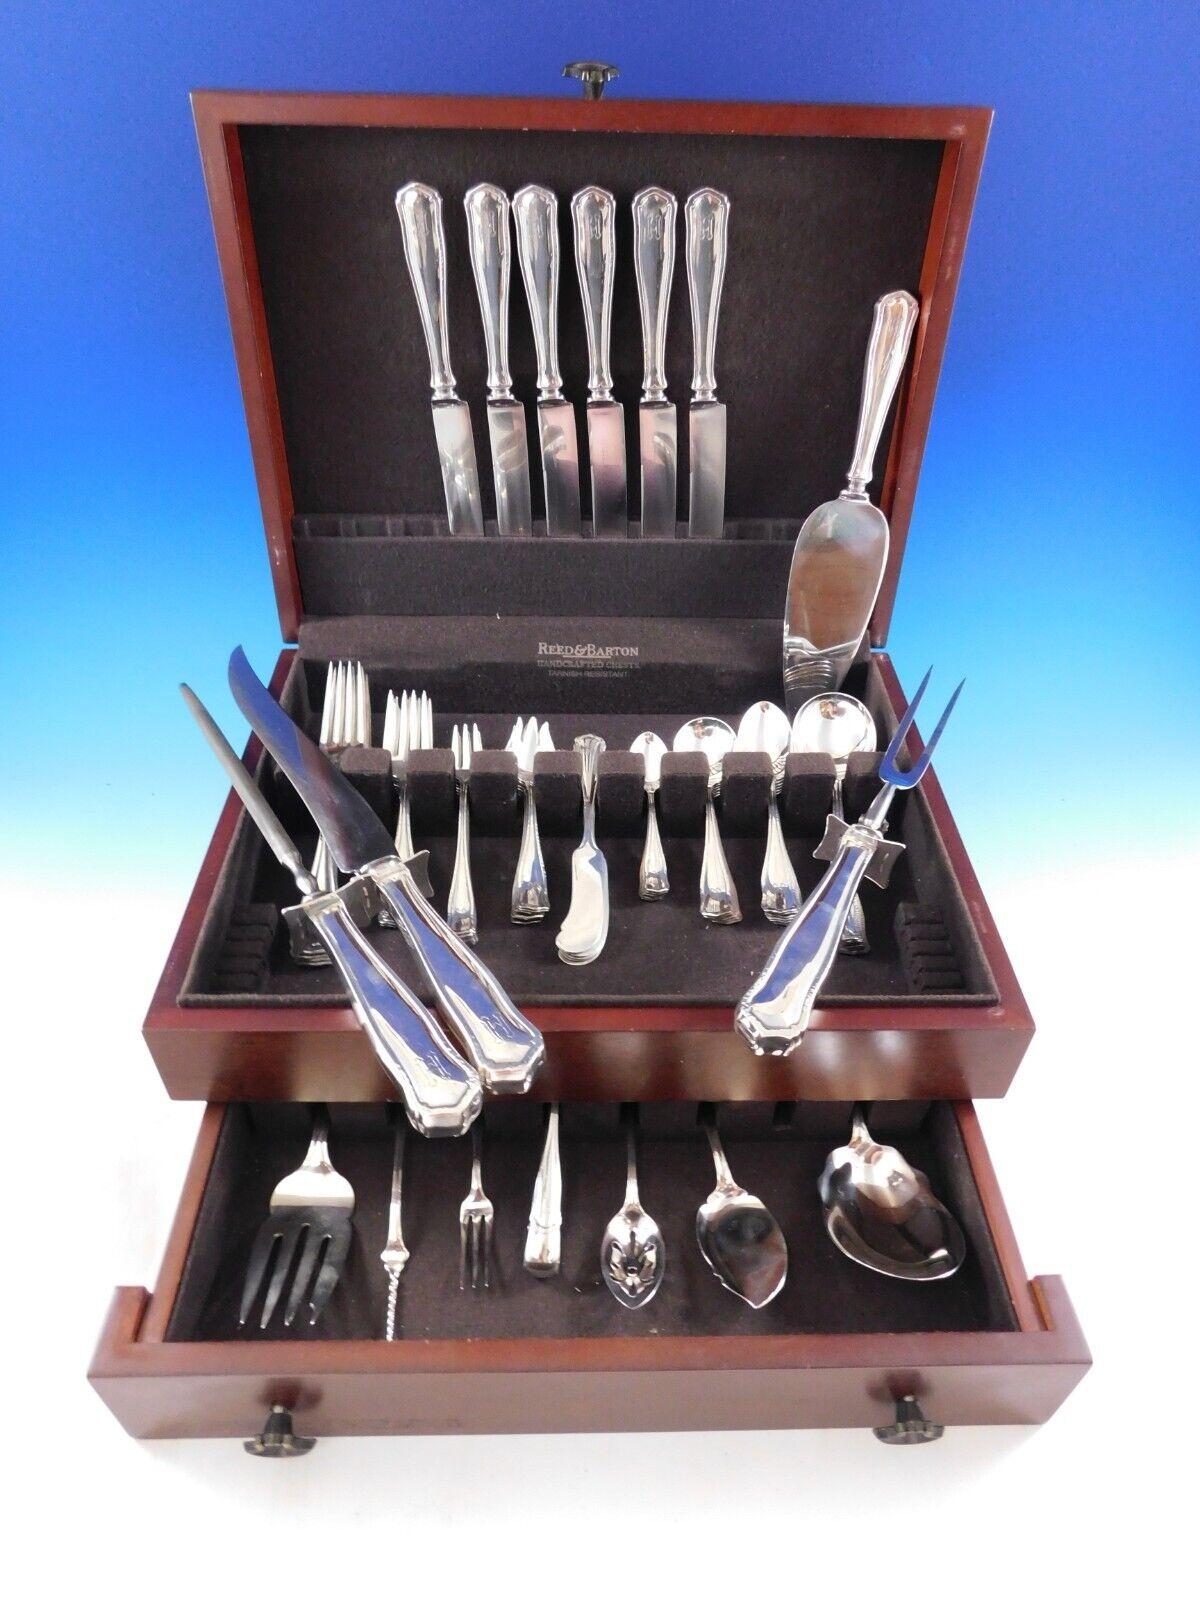 Dolores by Shreve sterling silver Dinner size Flatware set - 71 pieces. This Arts & Crafts pattern was introduced in the year 1909 and features a unique raised border. This set includes:

6 Dinner Size Knives, 9 1/2